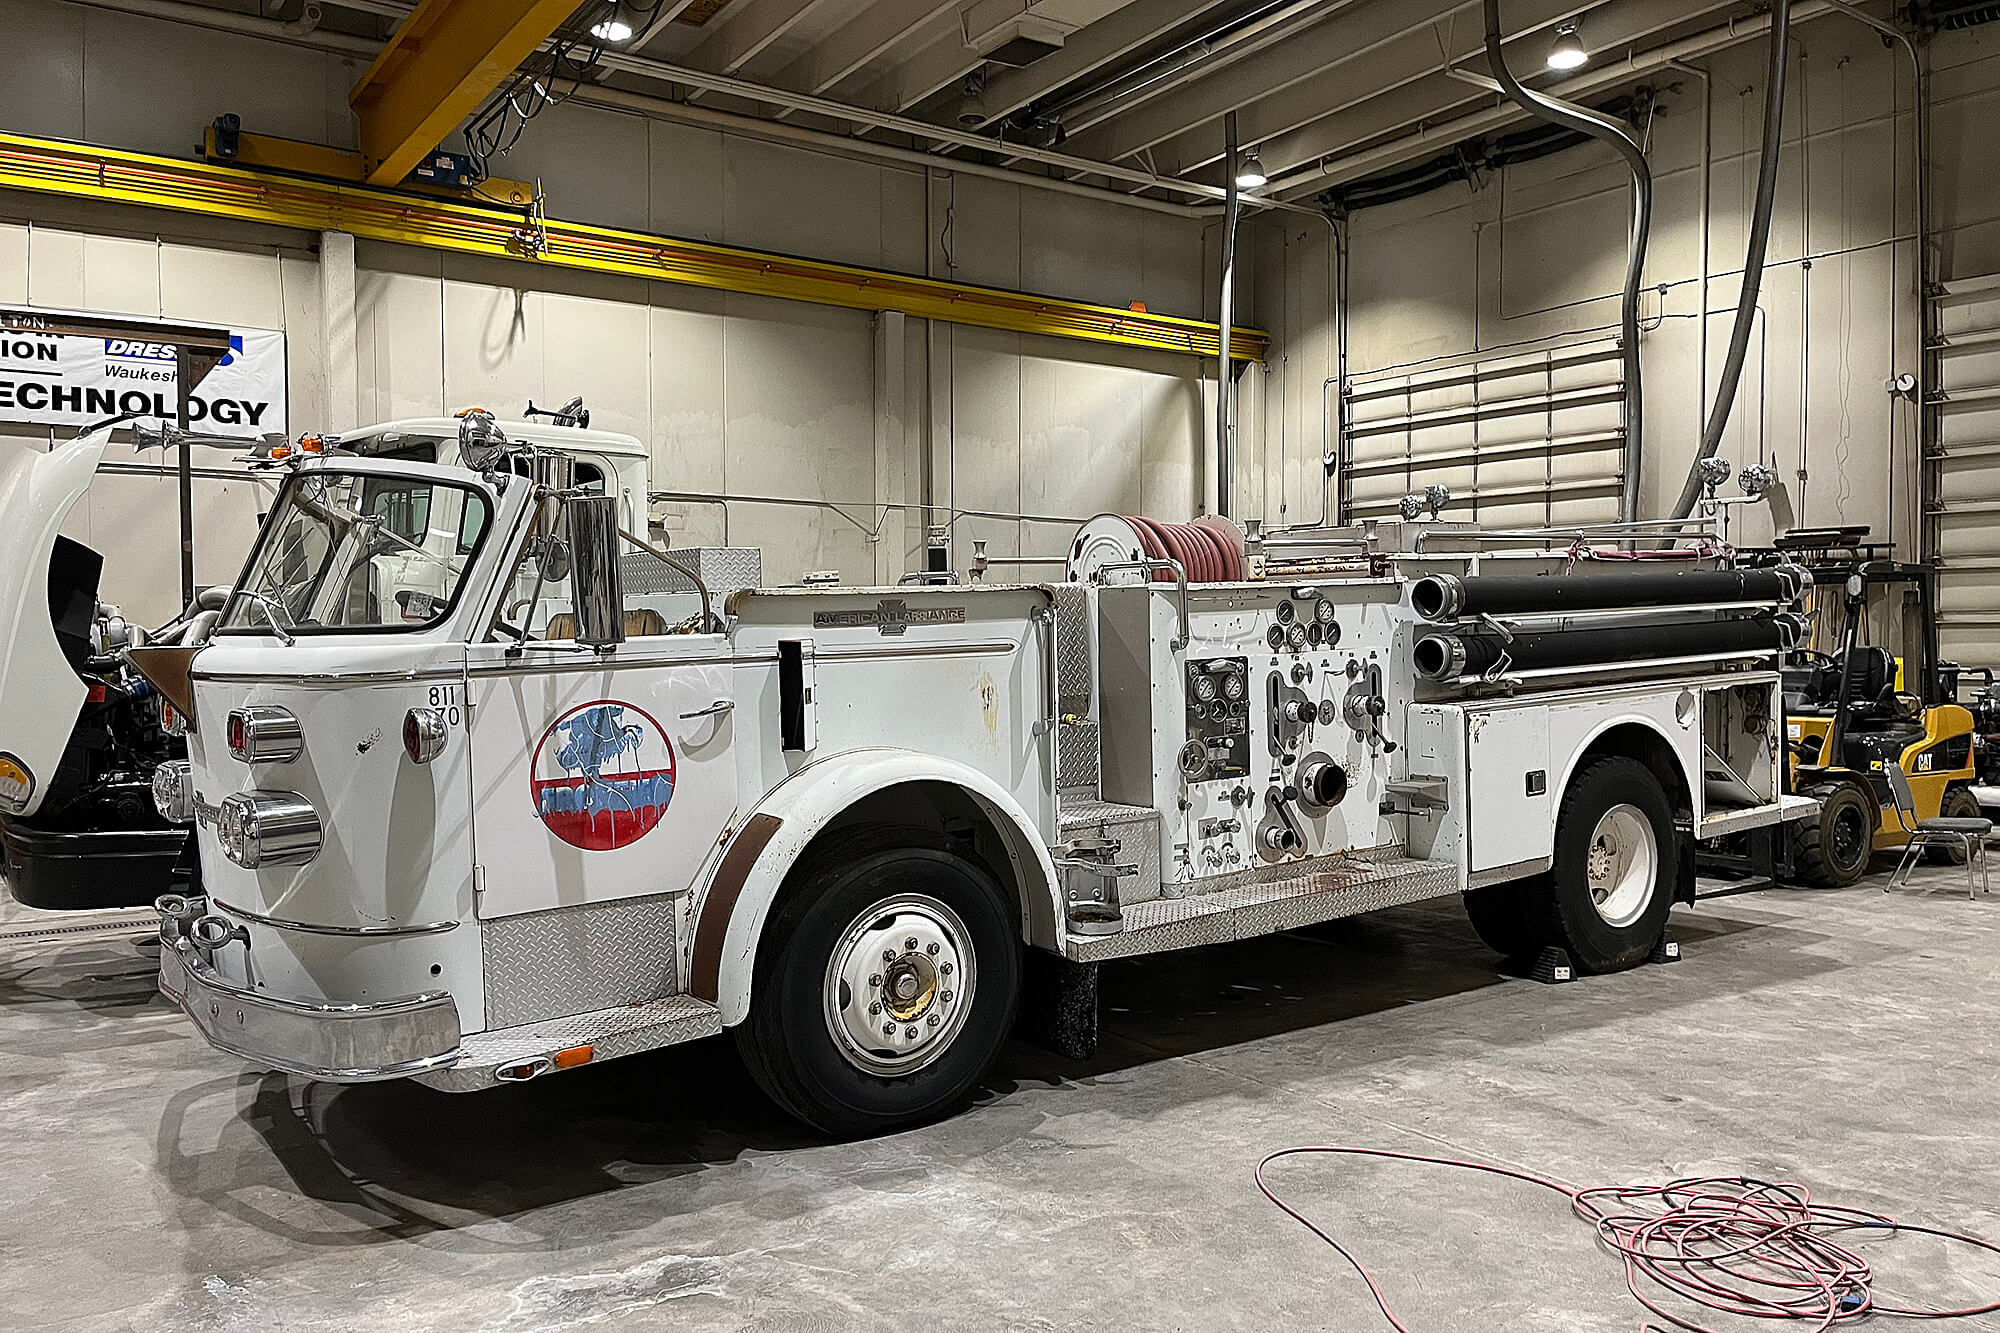 Photo of firetruck featured in the press release.